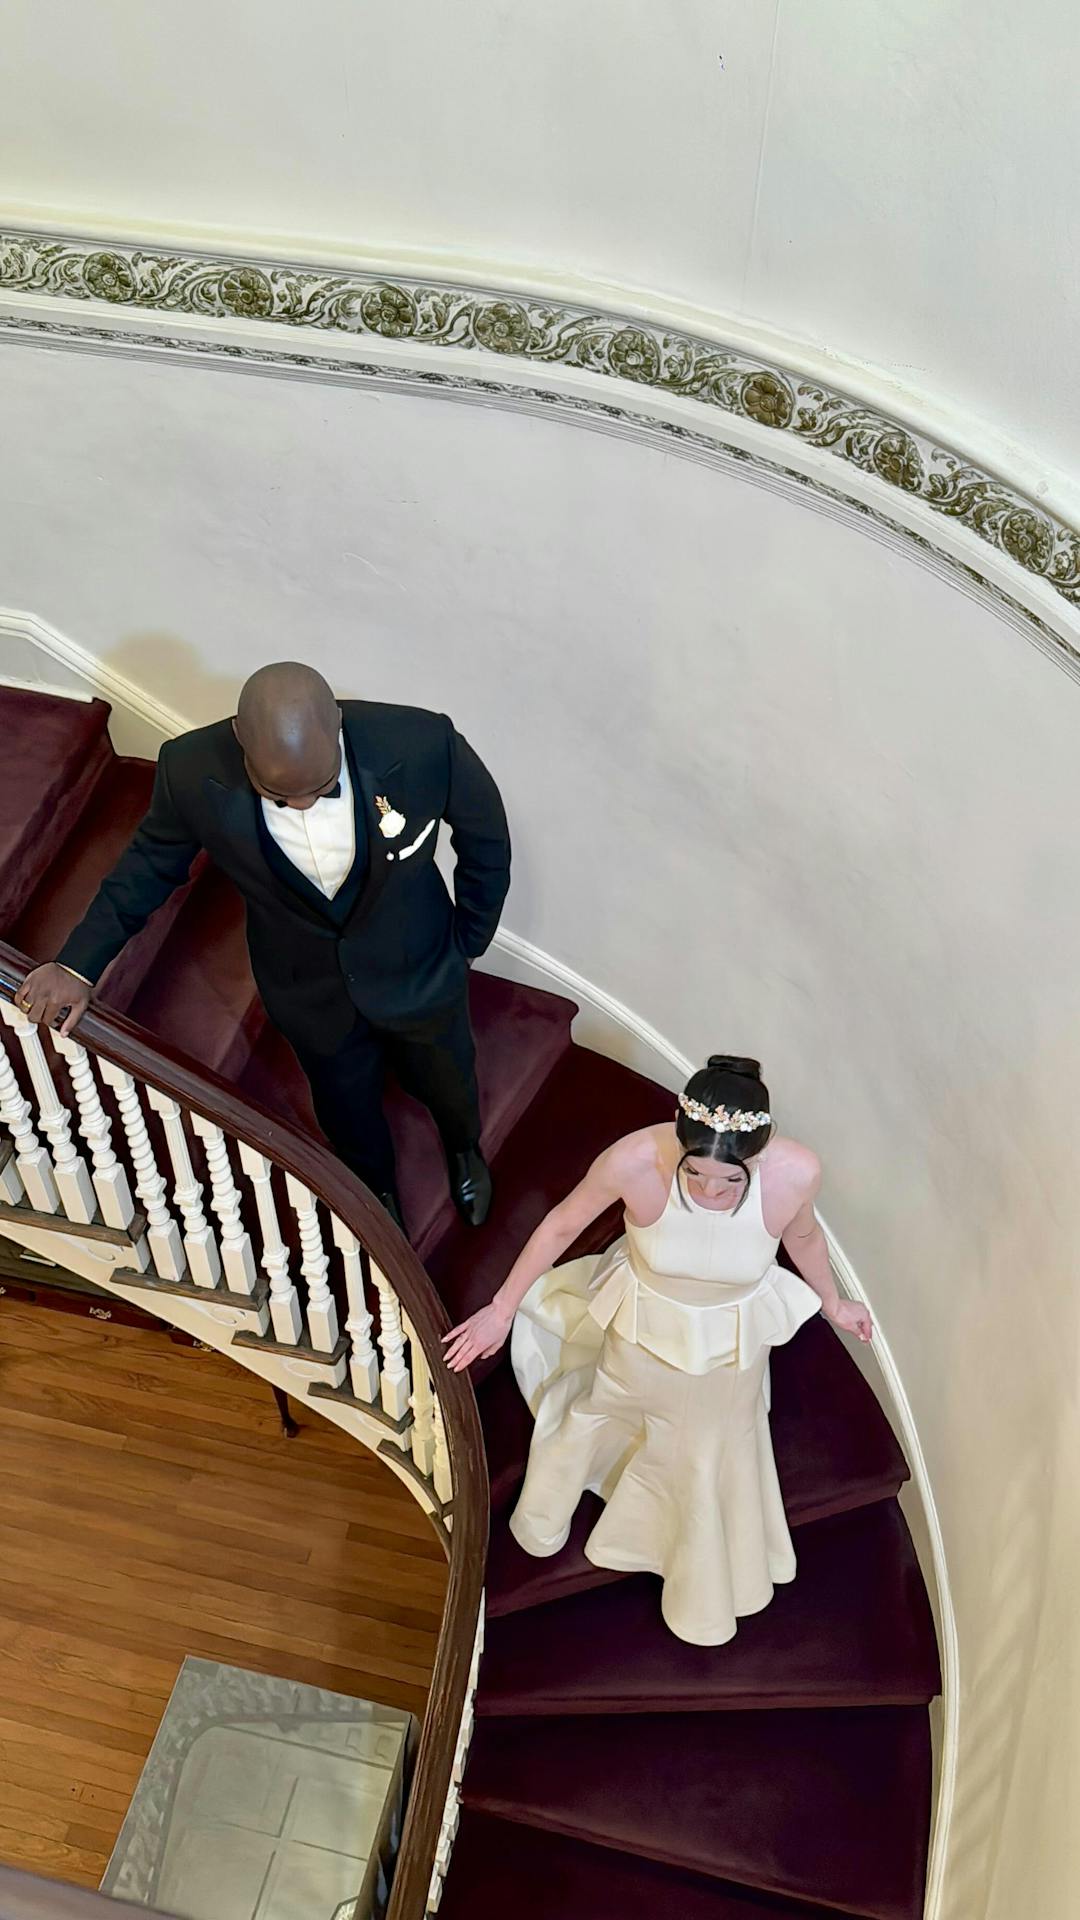 happy 1 month to J + D since they announced their marriage! their vibes are to die for 😍

couple: @julia.ettelbrick @ssj.genesis
venue: @stotesburymansion 
caterer: @feastivitiesevents_philly
photographer: @lilyandlimephoto
music: @onlywithesq
wedding dress: @halston_heritage
groom’s attire: @jcrewmens
rings: @cartier

if you’re interested in booking me as your wedding content creator to capture moments like this, send me a DM or inquire on my website & we’ll chat about my availability and your vision 🫶

#weddingcontentcreator #philadelphiaweddingcontentcreator #phillyweddingcontentcreator #phillywedding #philadelphiawedding #surprisewedding
keywords: Philly wedding content creator in Philadelphia PA surprise wedding